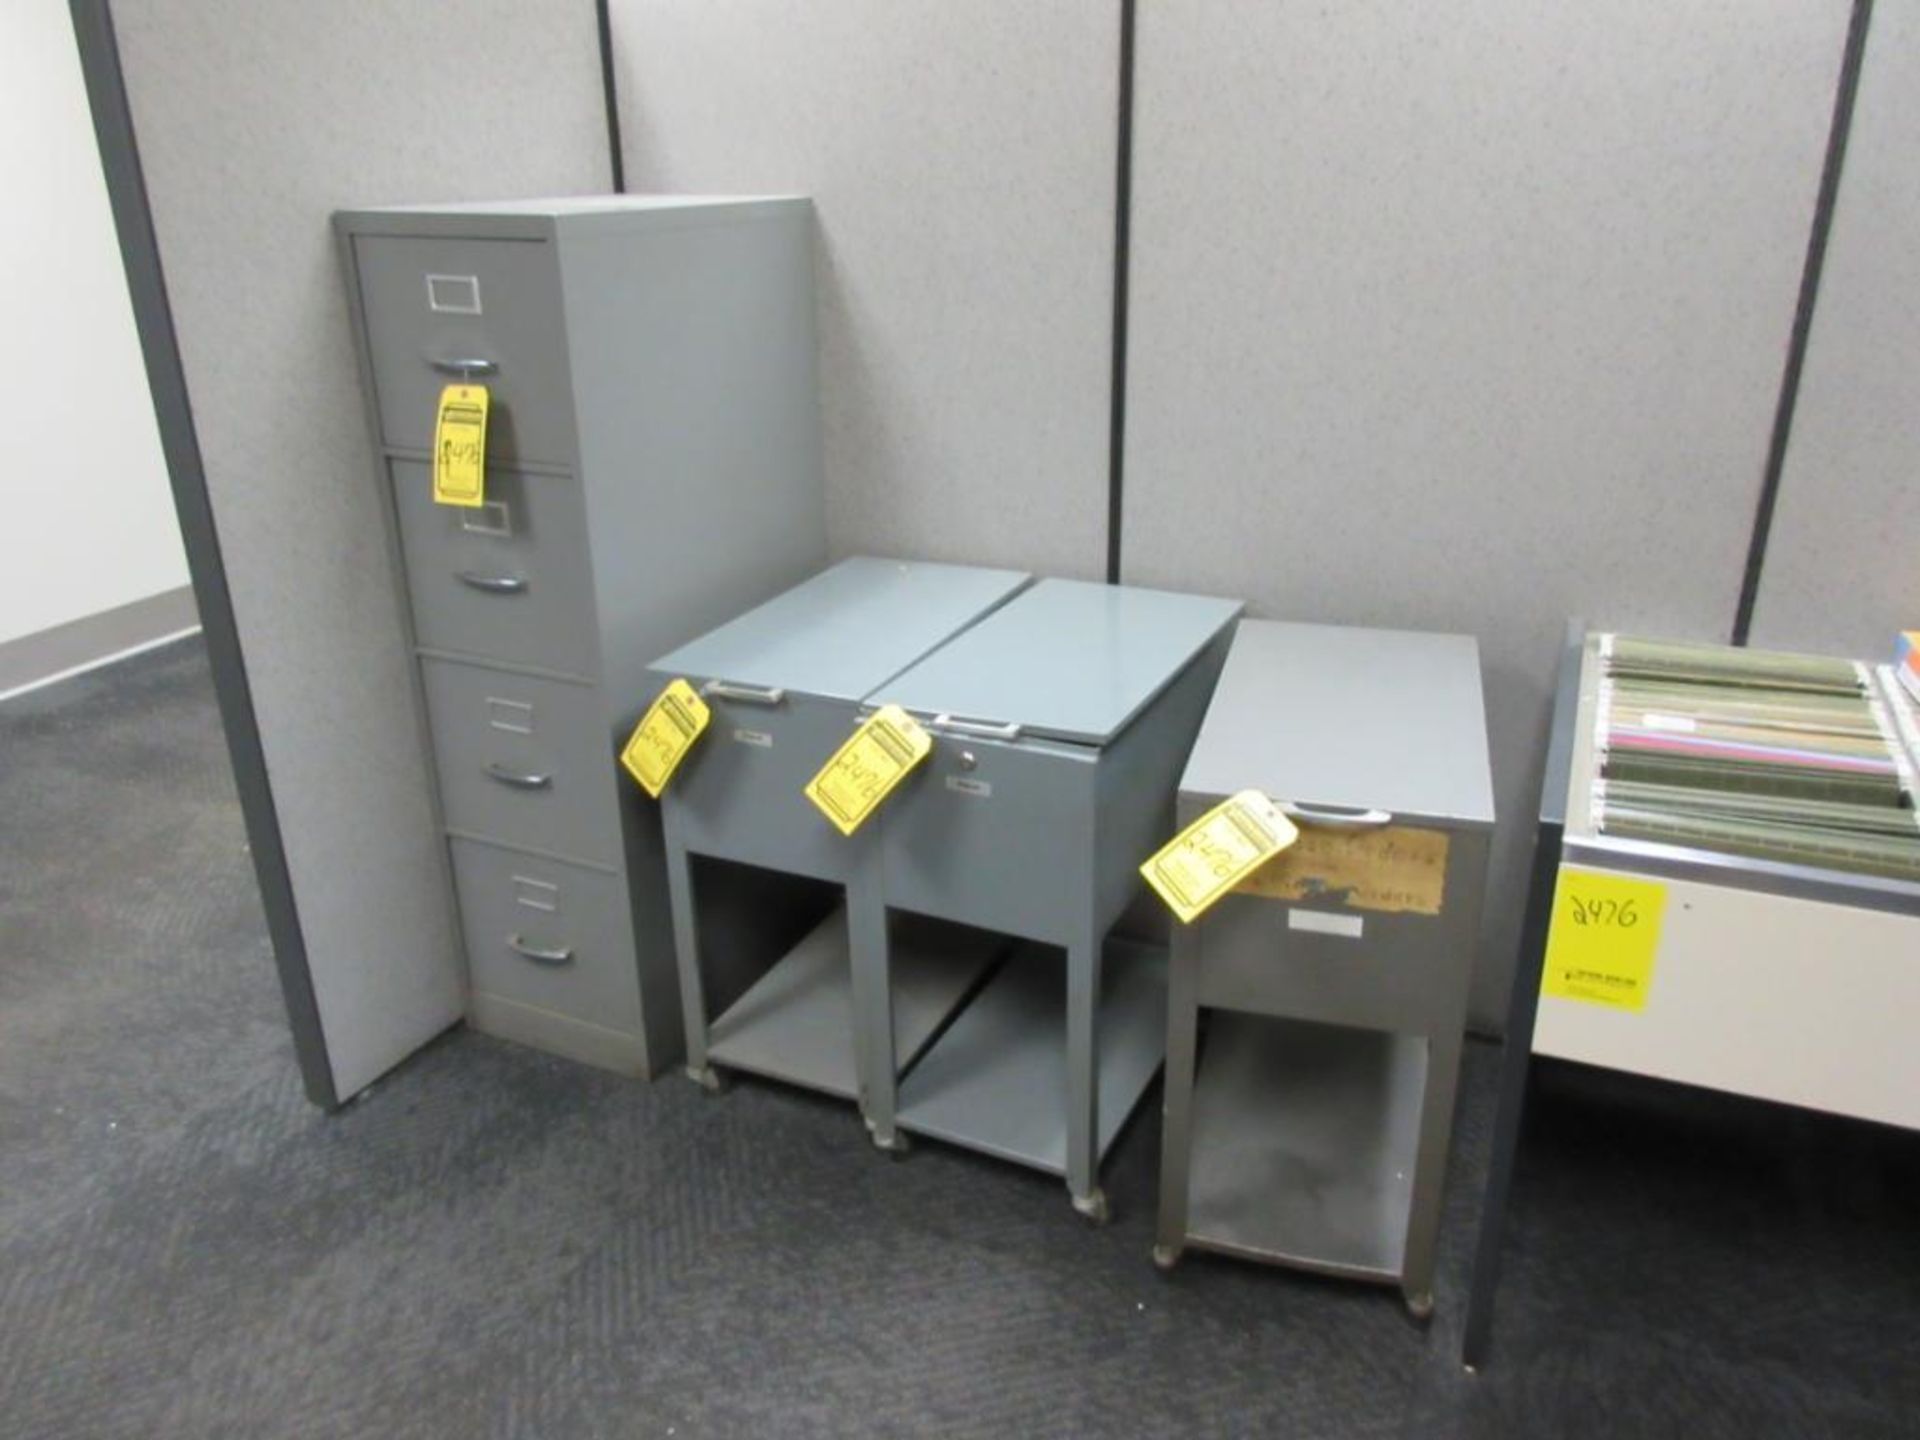 OFFICE AND CONTENTS: DESK CHAIRS FILE CABINETS SHELVING UNIT 2-DOOR CABINET TABLES CUBICLE PANELS - Image 3 of 9